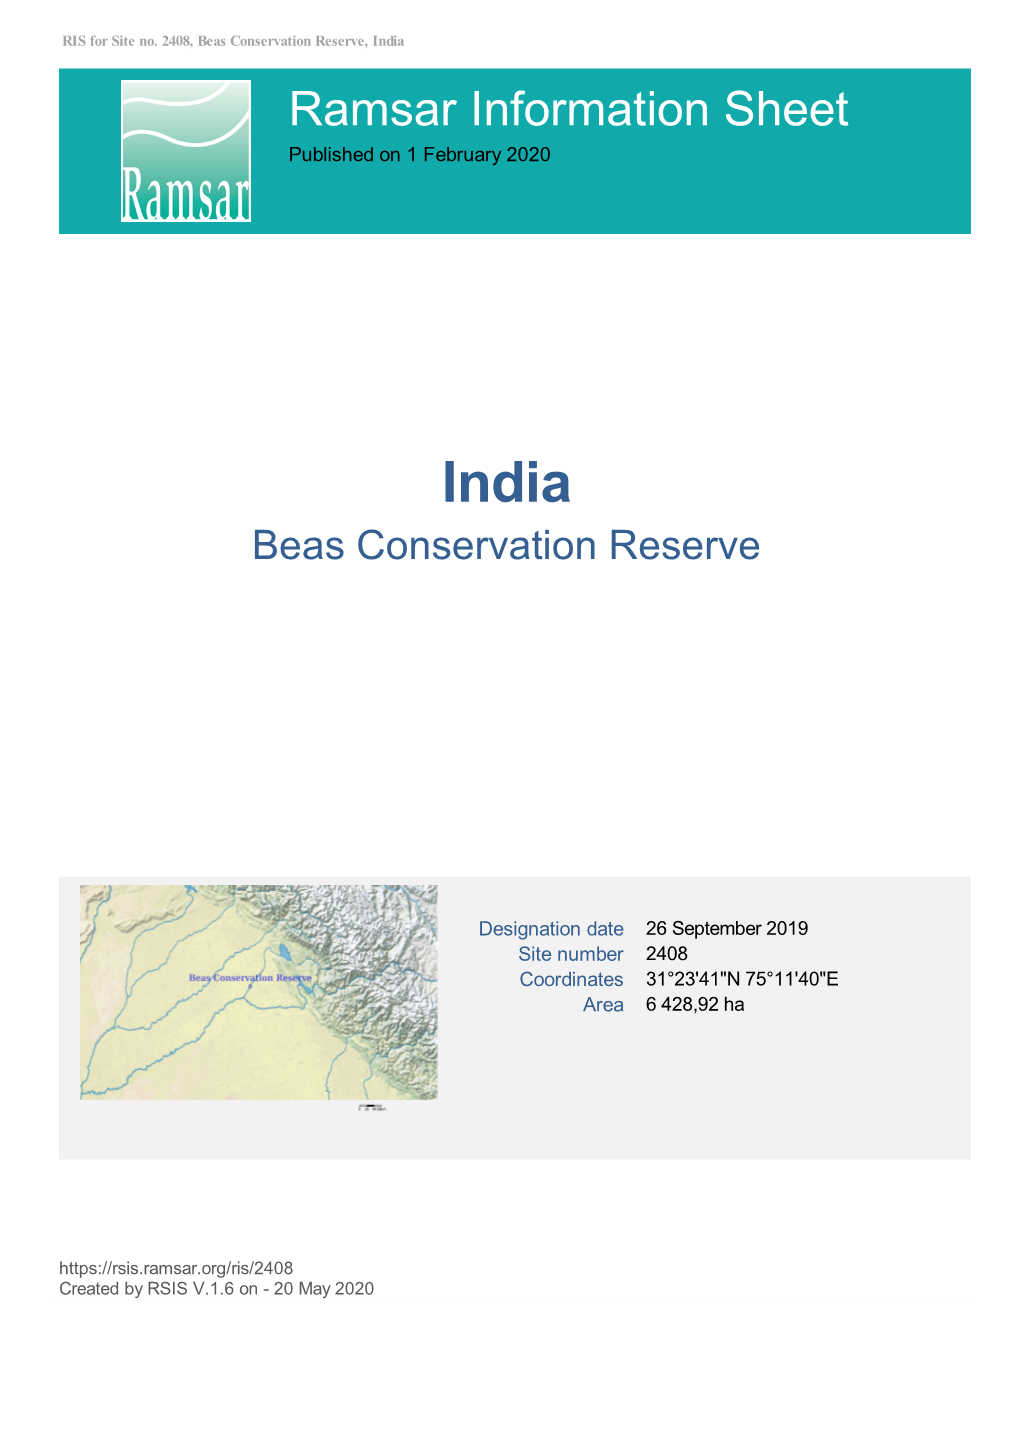 Ramsar Information Sheet Published on 1 February 2020